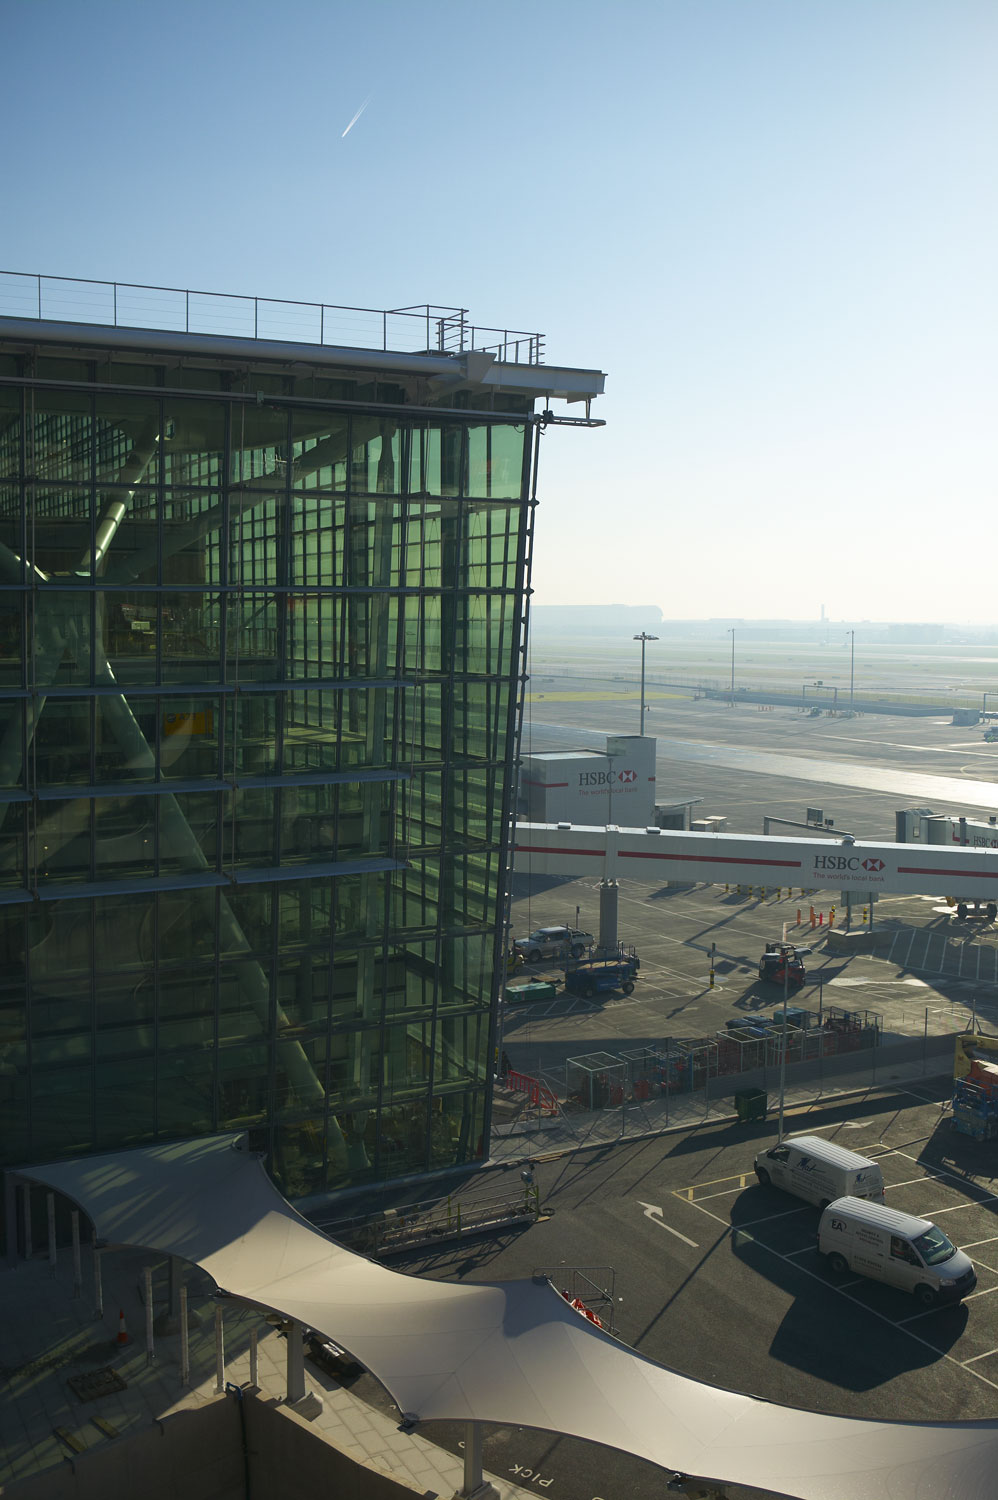 Heathrow Airport Terminal 5 glazed facade and apron | Commercial Building Photographer | Commercial Photography